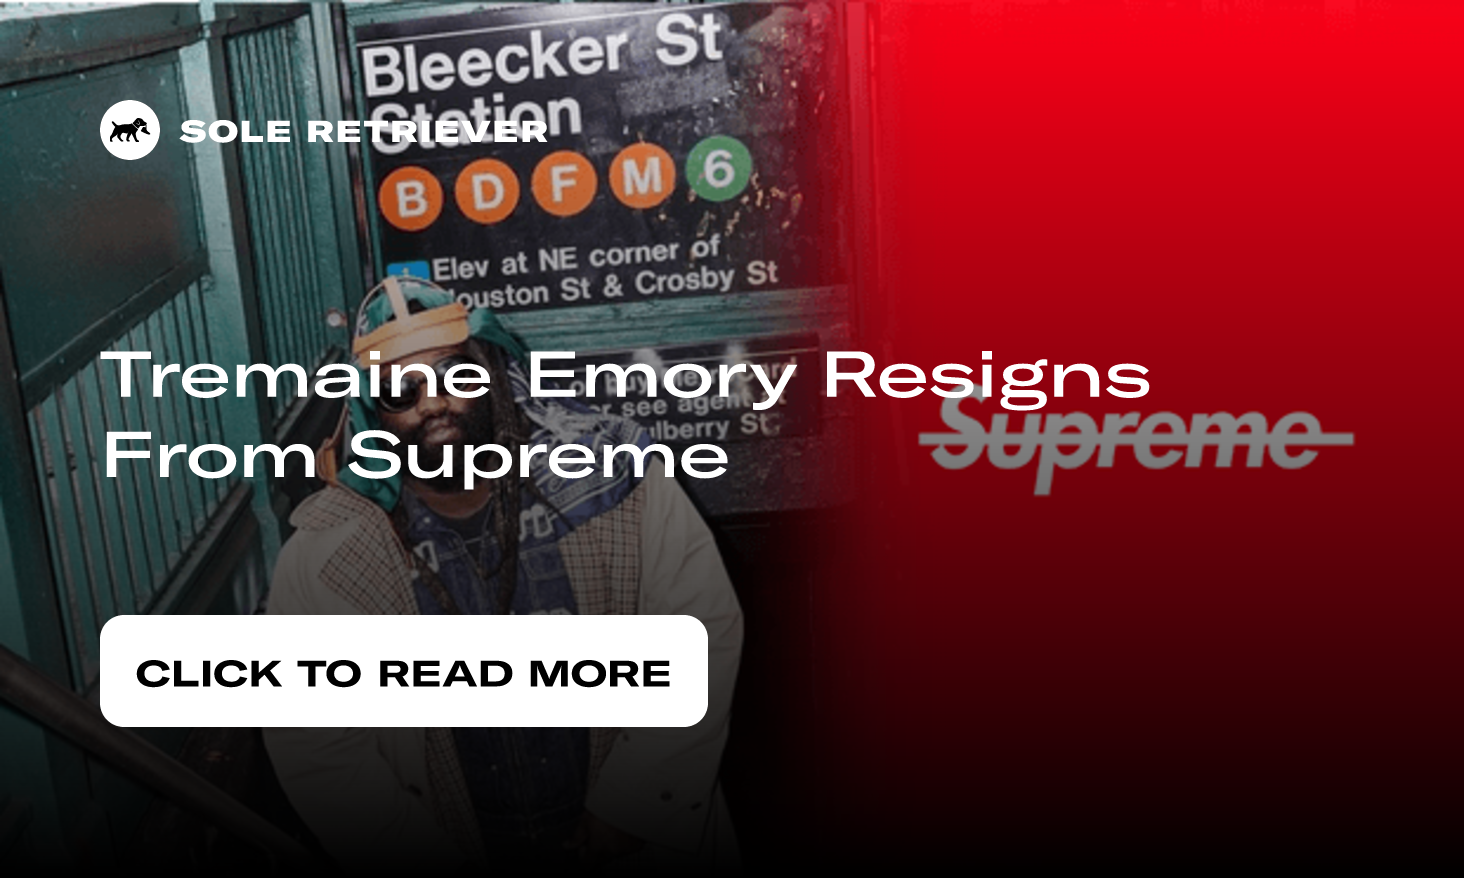 Tremaine Emory on why he really resigned from Supreme